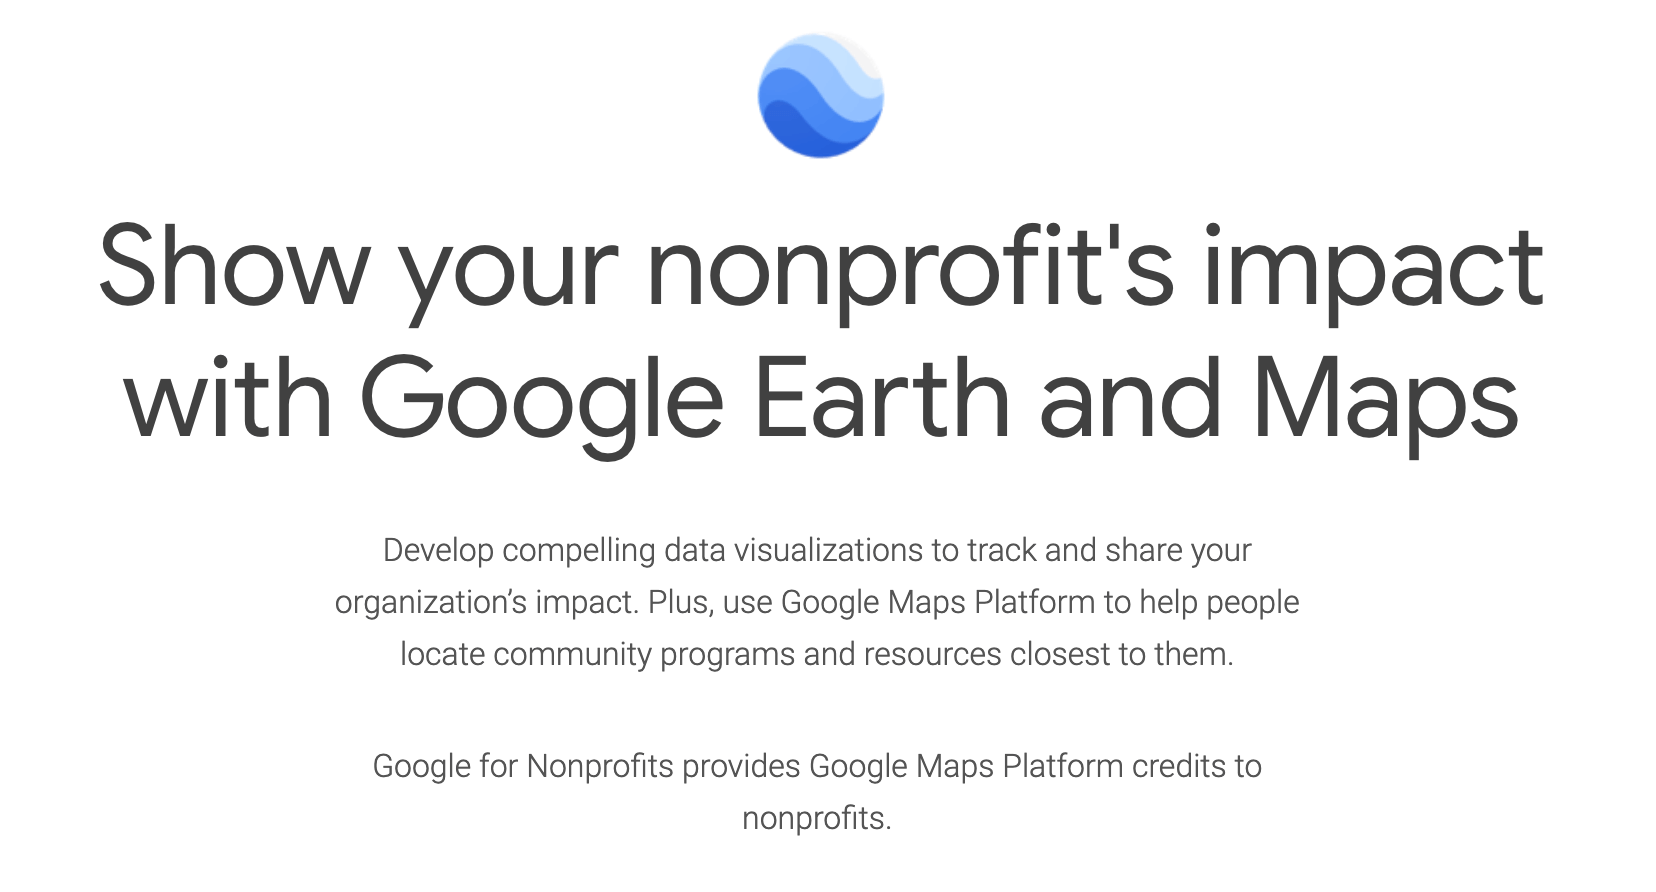 google for non profits - Google Earth and Maps